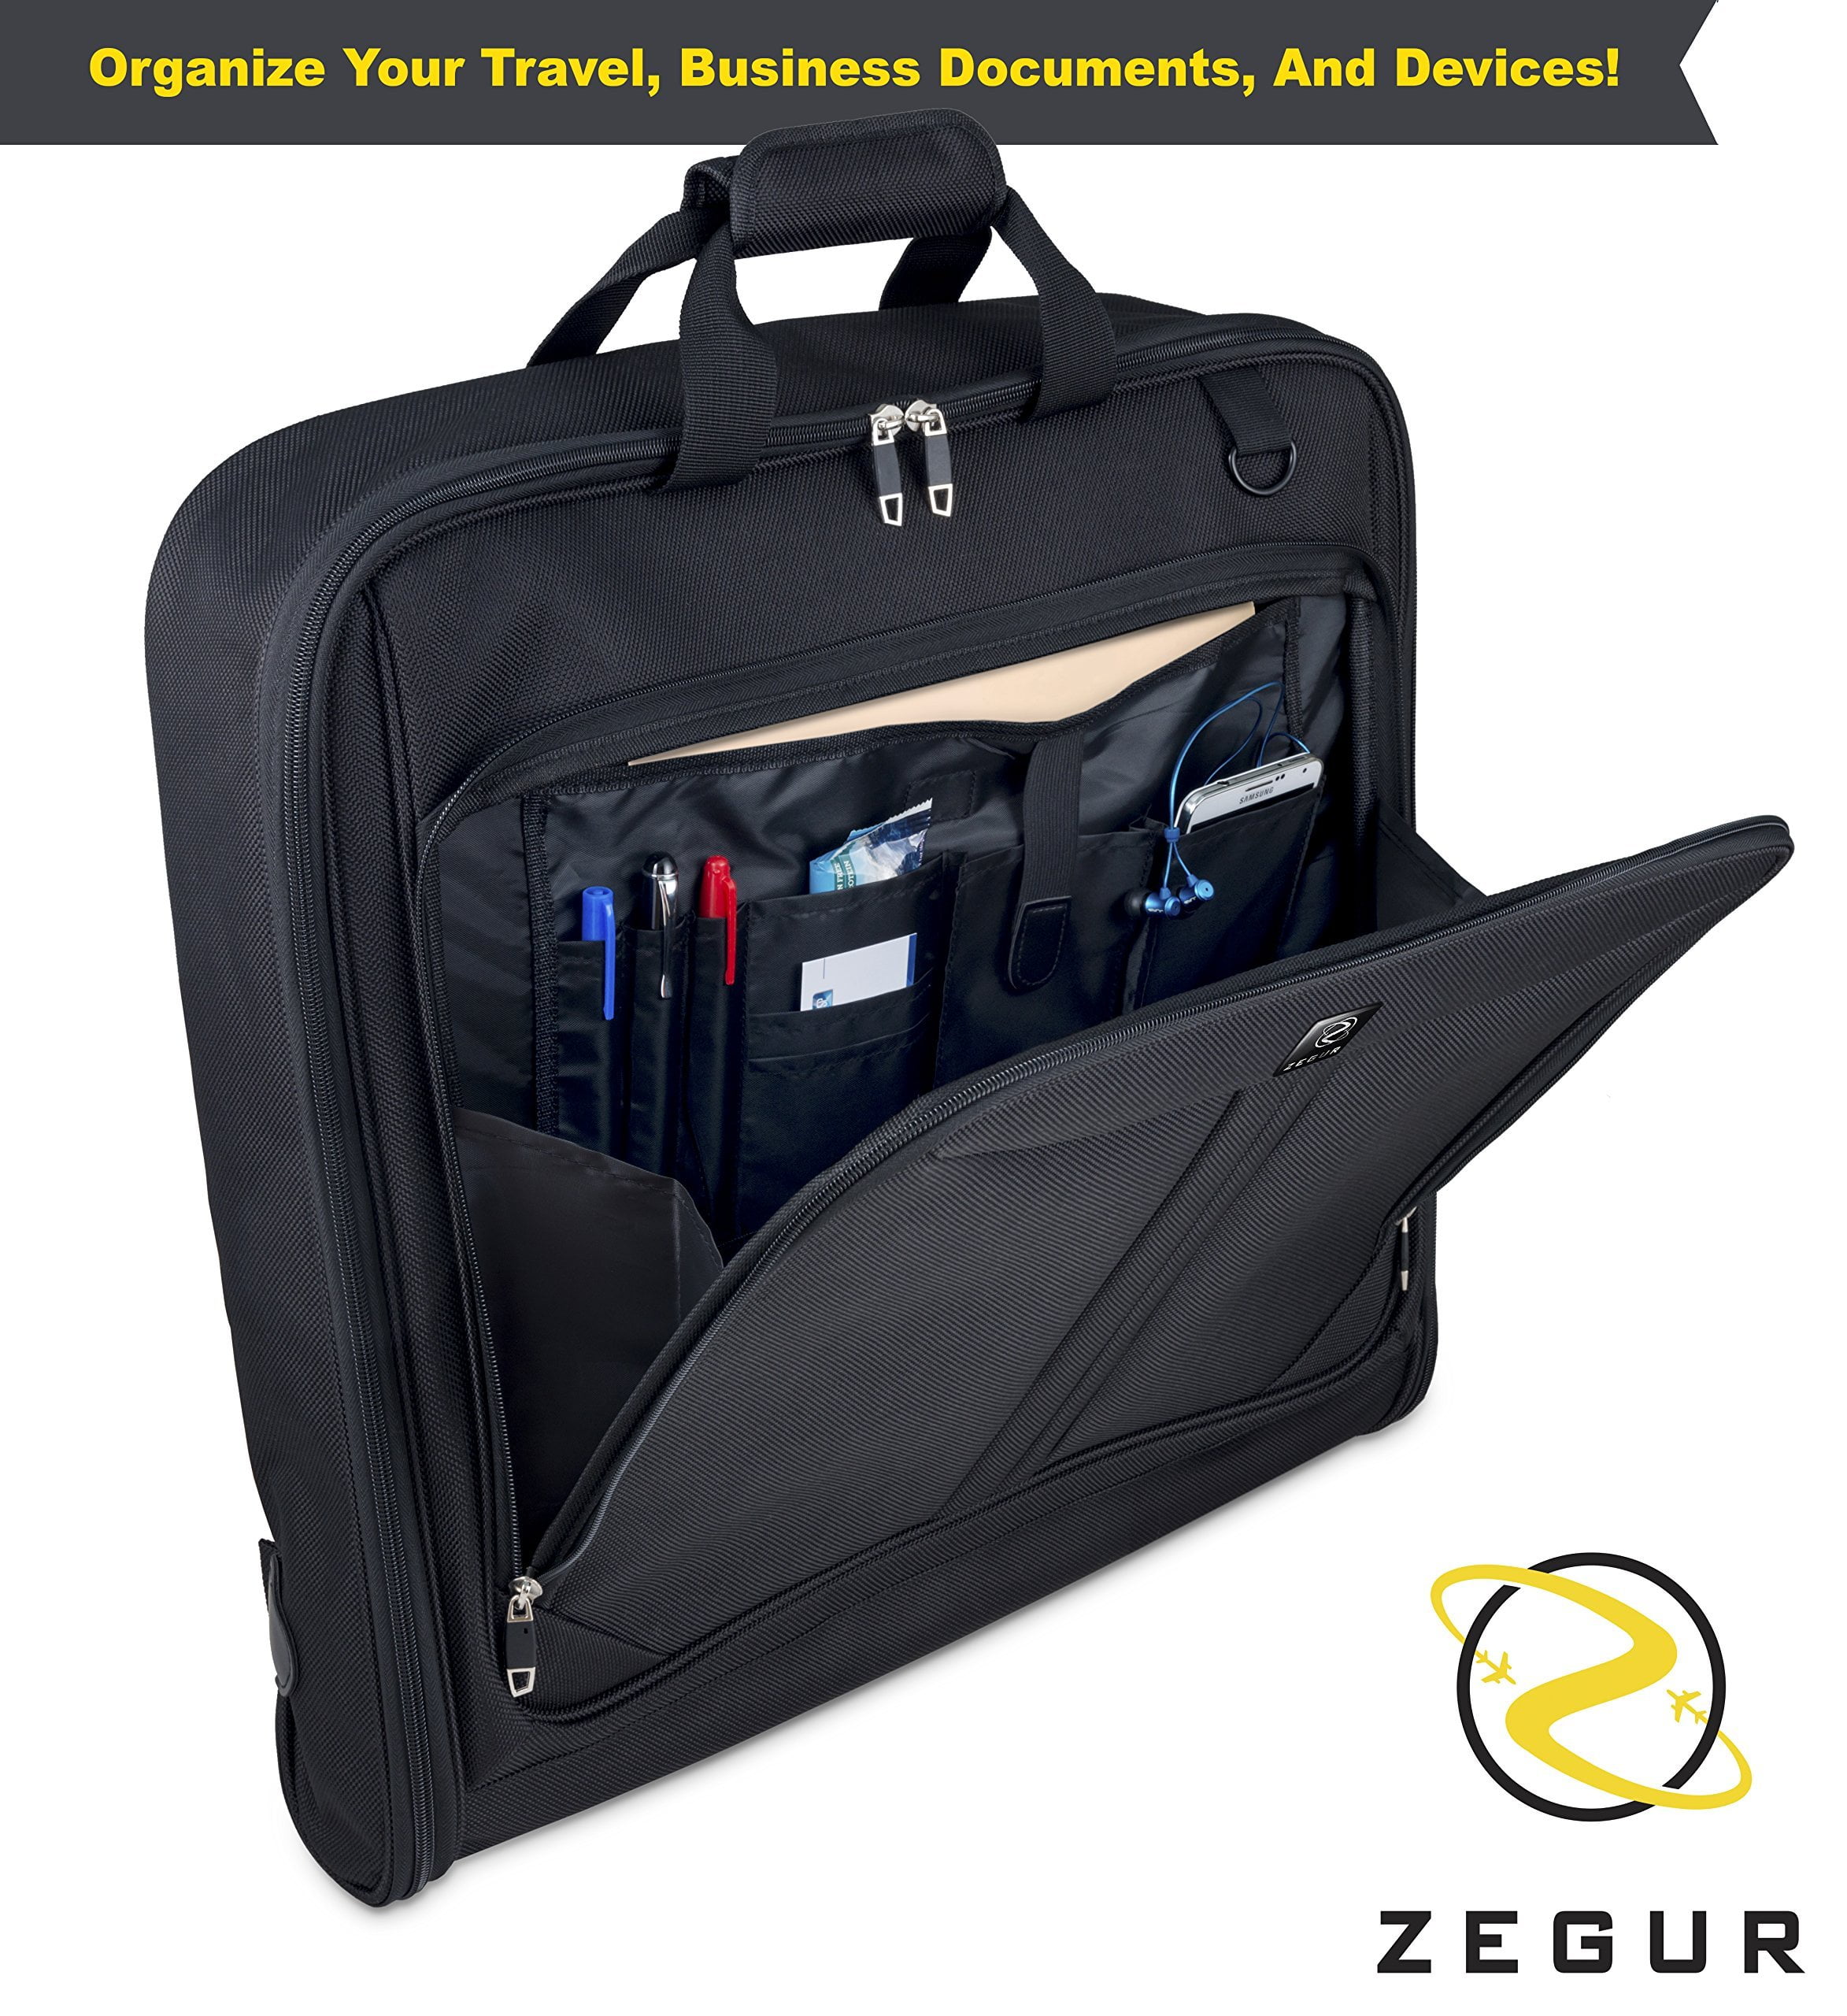 ZRSUN Garment Bag for Travel, Carry On Garment Bag,3 in 1 Hanging Suitcase .